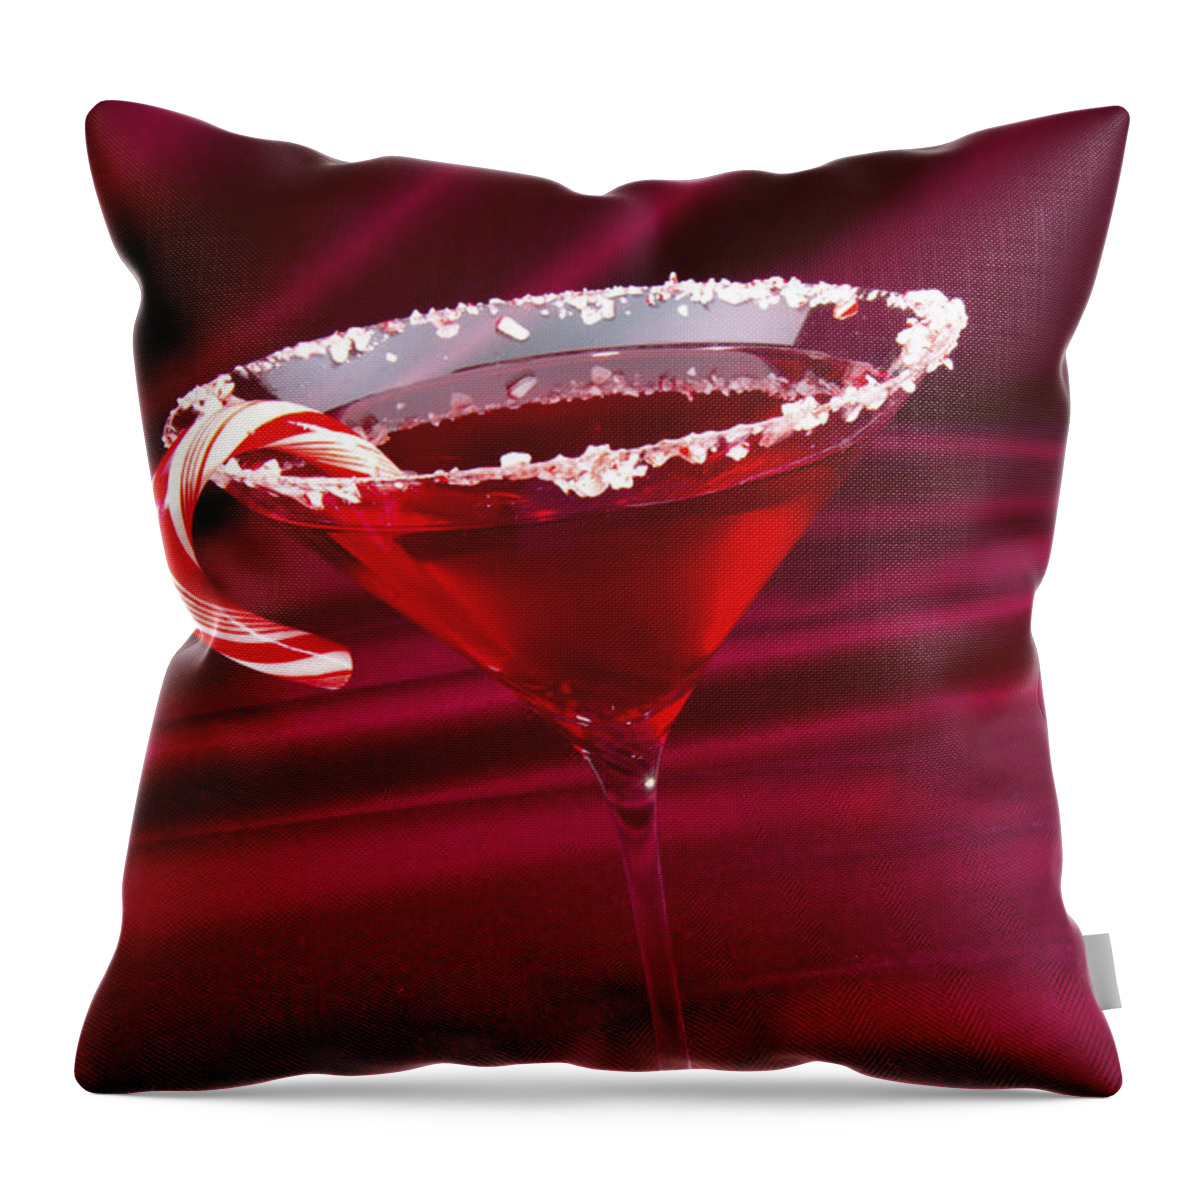 Beverage Throw Pillow featuring the photograph Candy Cane Martini by Karen Foley